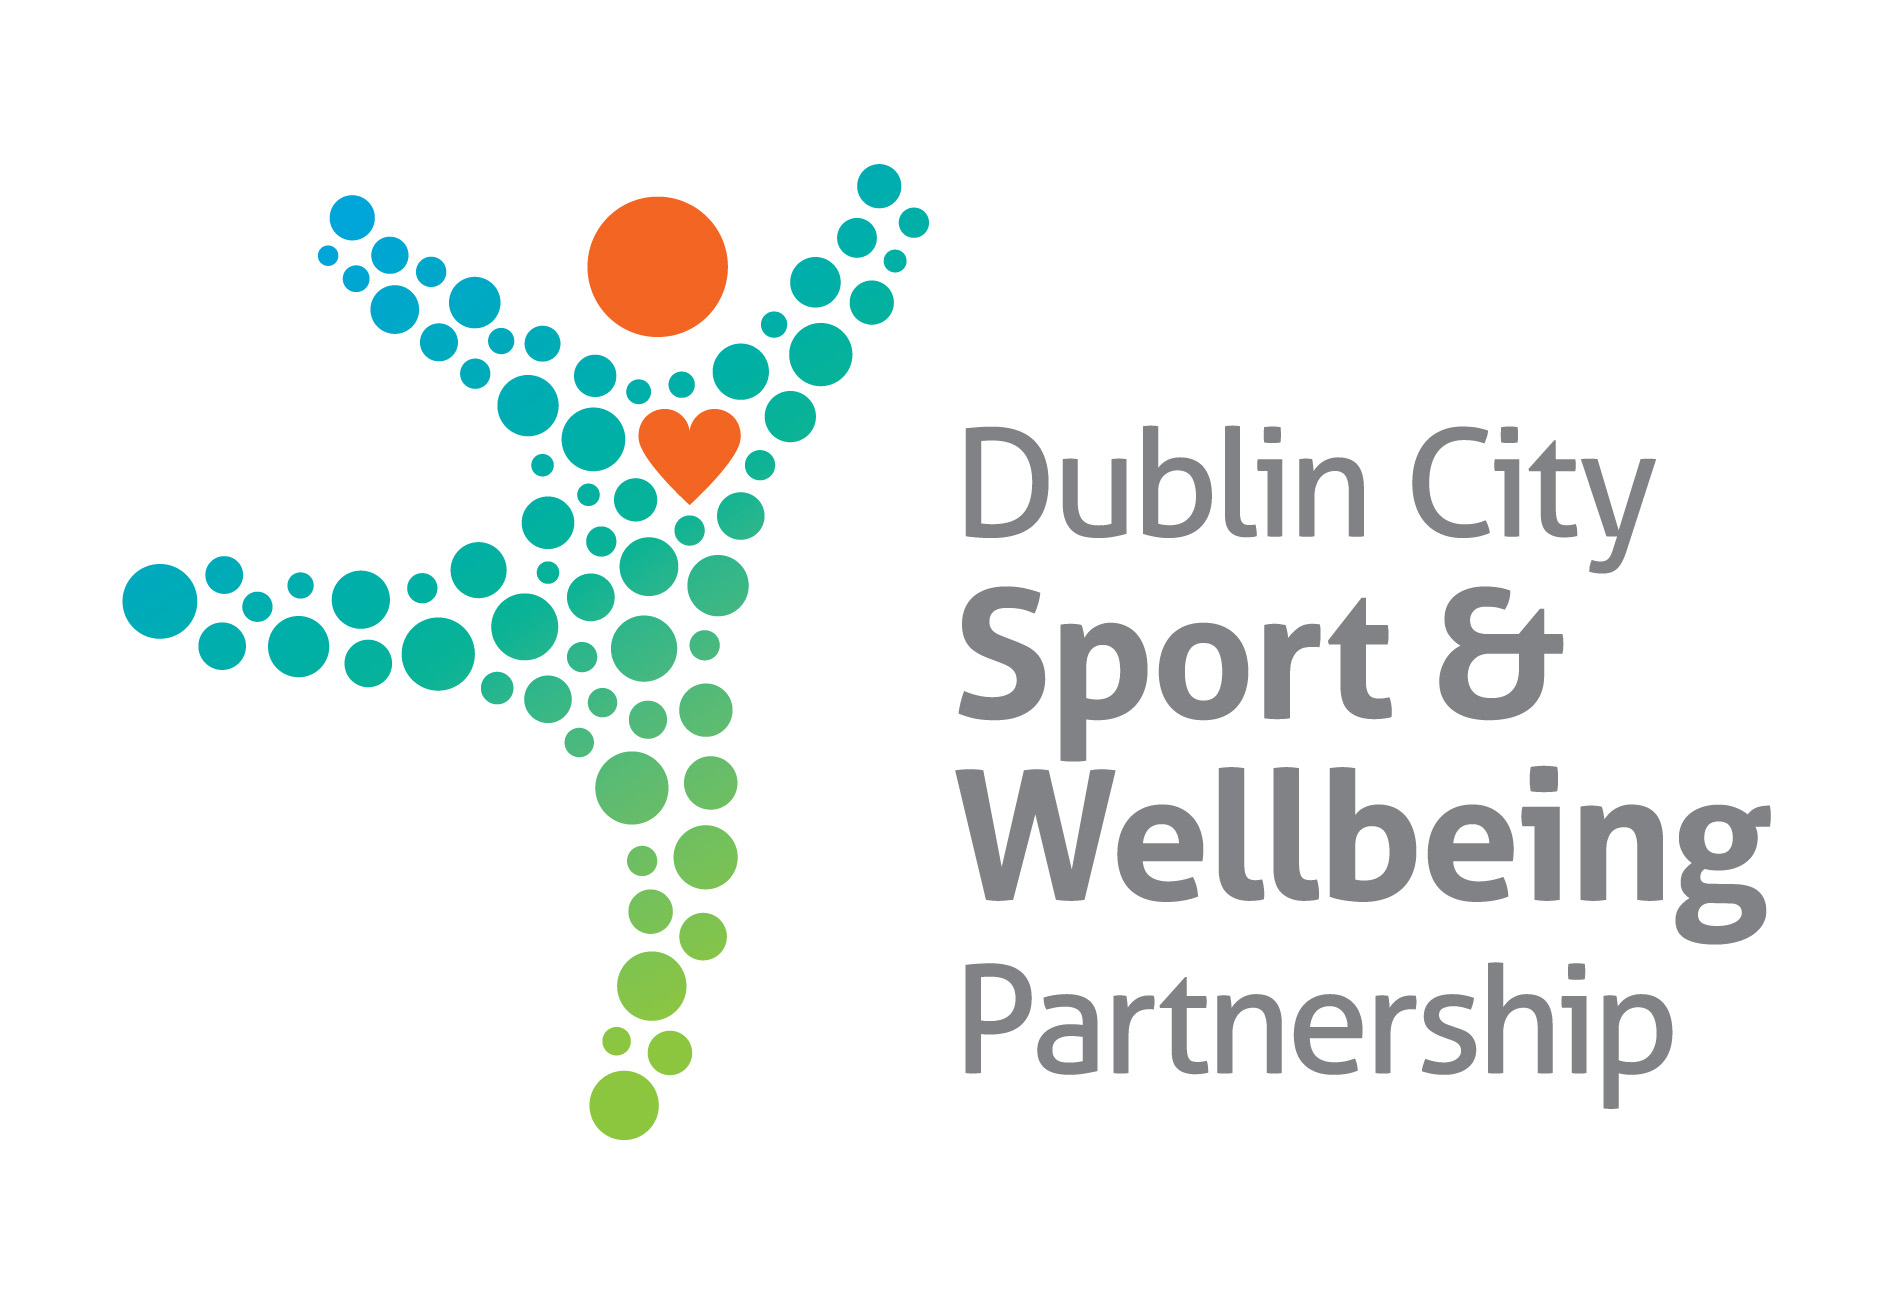 Dublin City Sport and Wellbeing Partnership